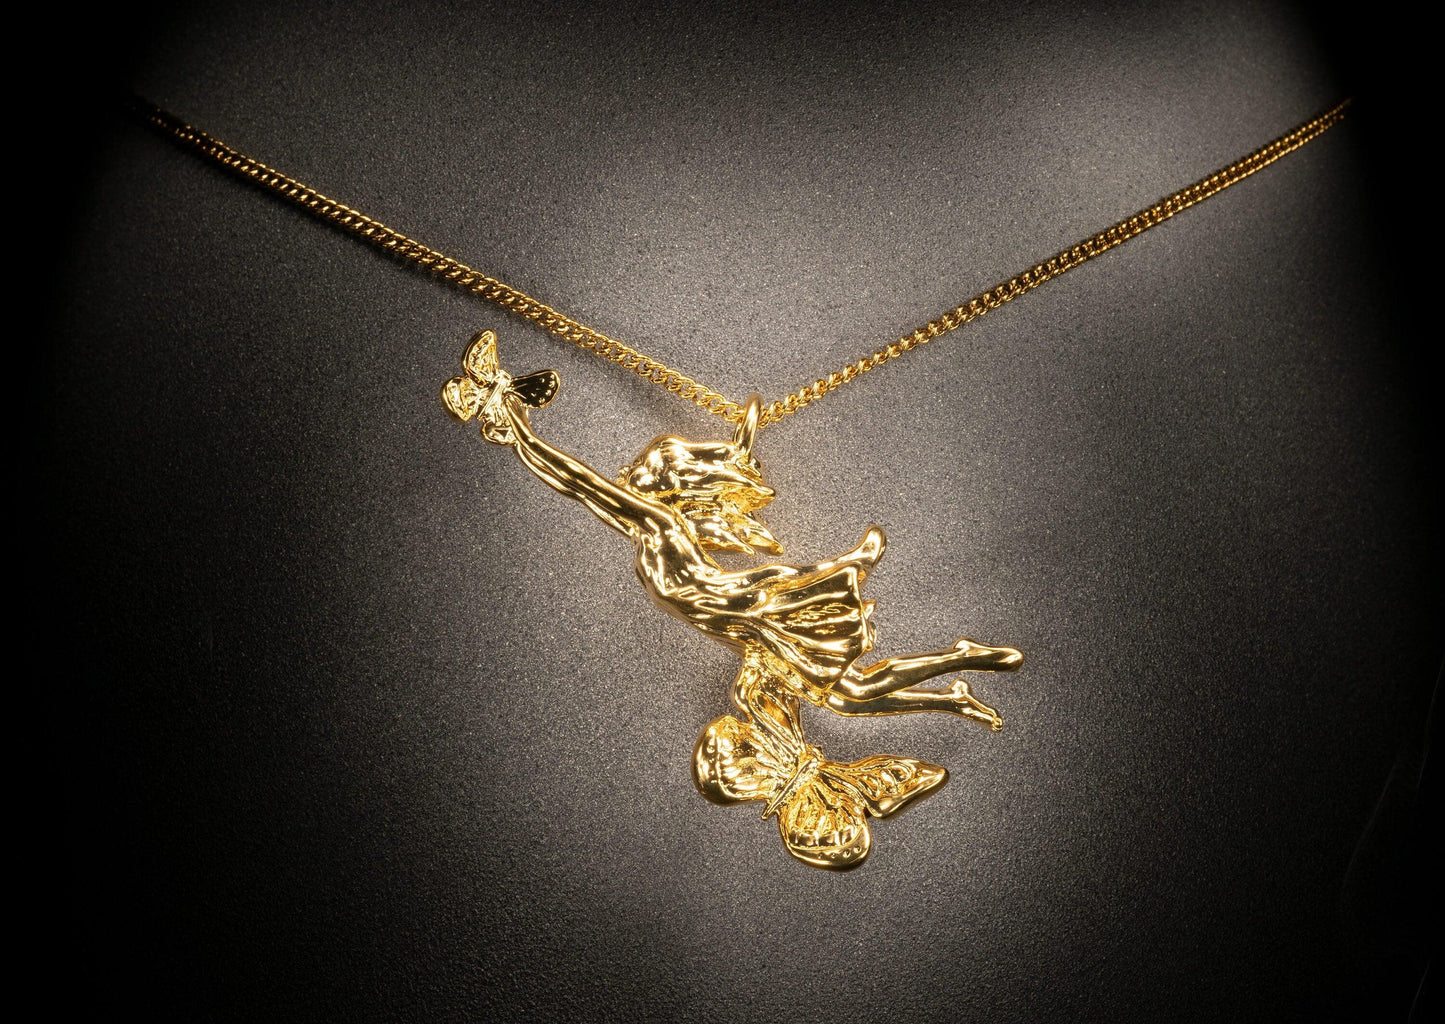 Unique Pendant Necklace "Lift Her with Butterflies" - Gold Gift, Gift For Mom, Artistic, Jewelry